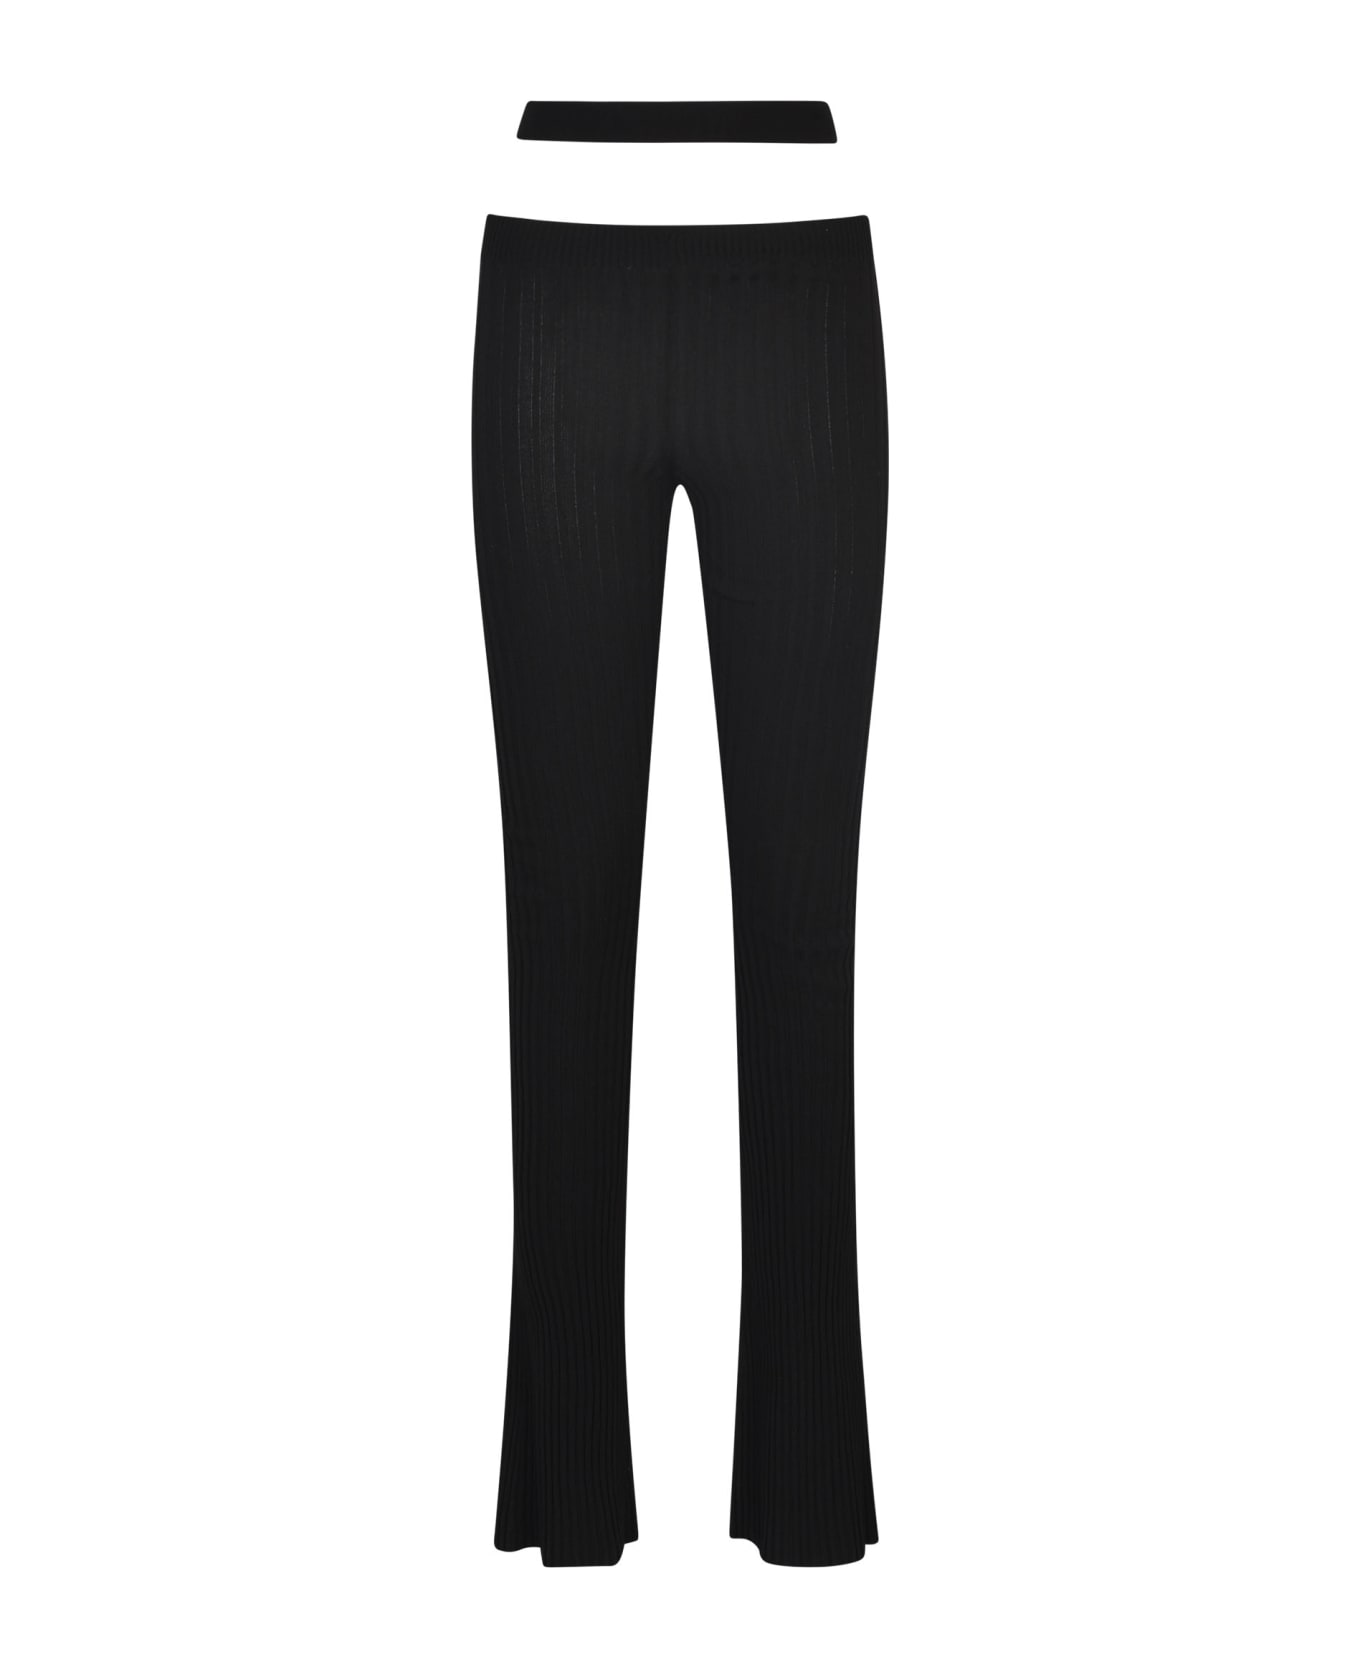 ANDREĀDAMO Ribbed Knit Flare Trousers - Black